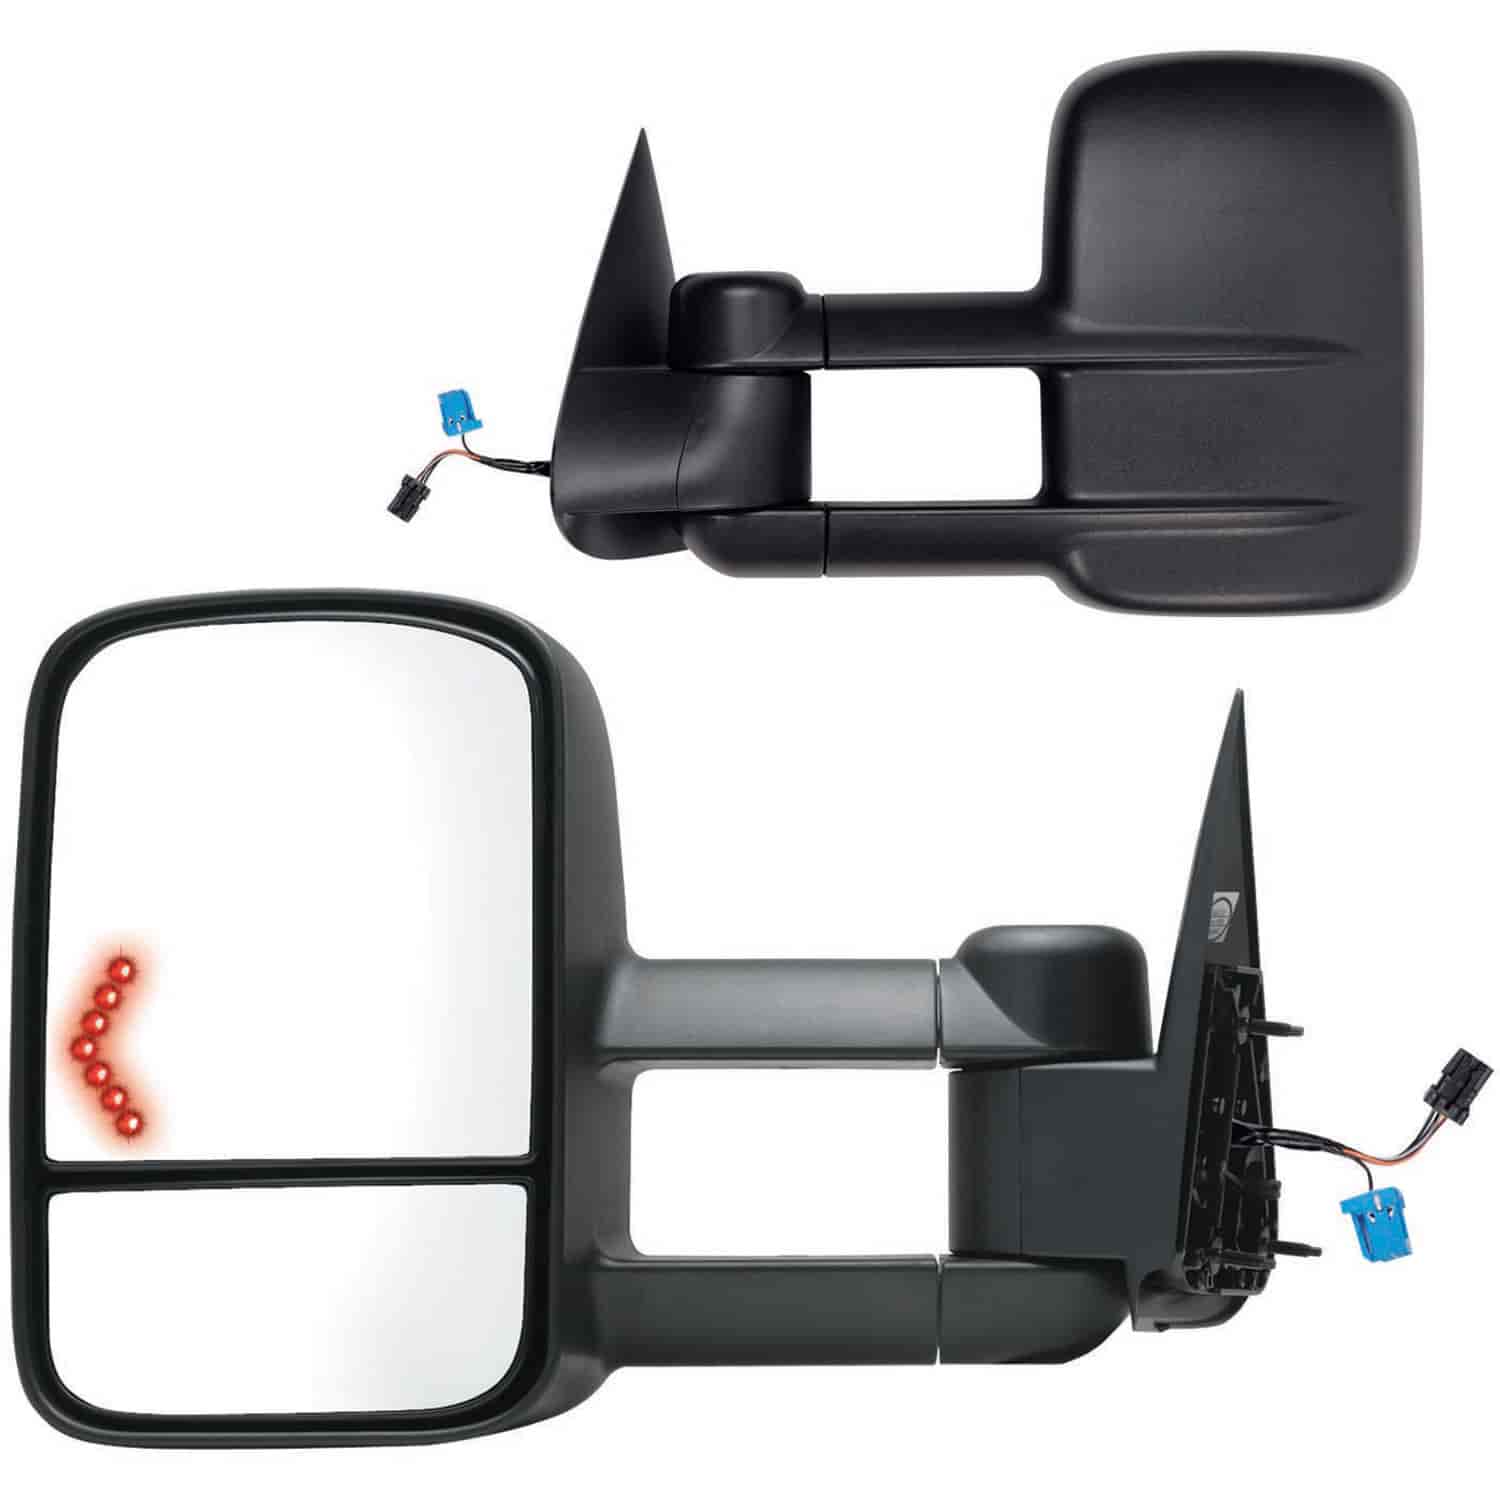 OEM Style Replacement Mirror Fits 2003 to 2006 Chevy Silverado & GMC Sierra